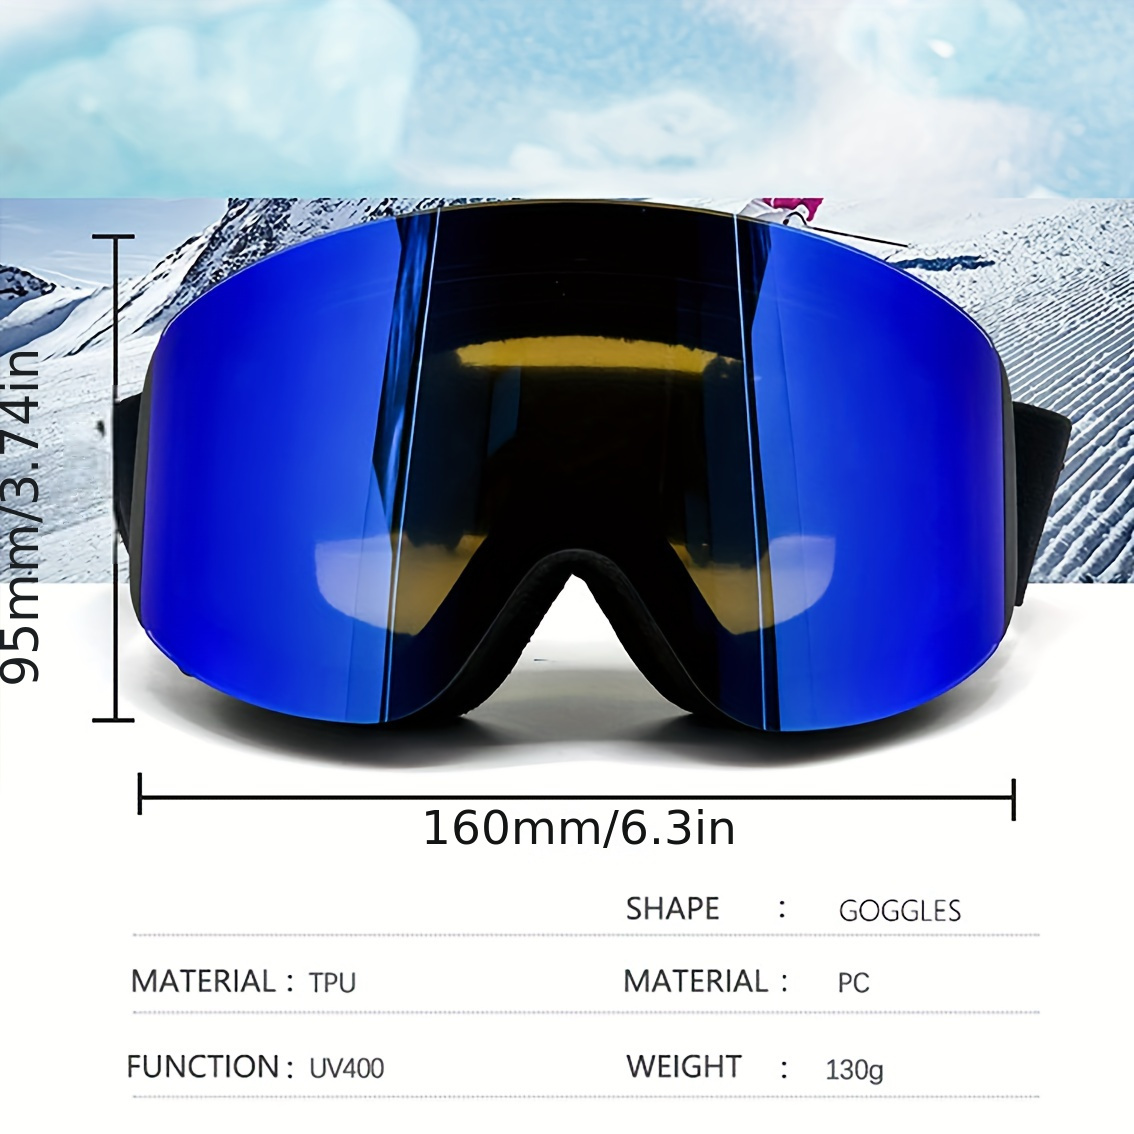 1pc Polarized Ski Goggles With Double Layer Lens, Skiing Anti-fog UV400  Snowboard Goggles, Outdoor Sports Ski Glasses Eyewear, Snowboard Goggles *